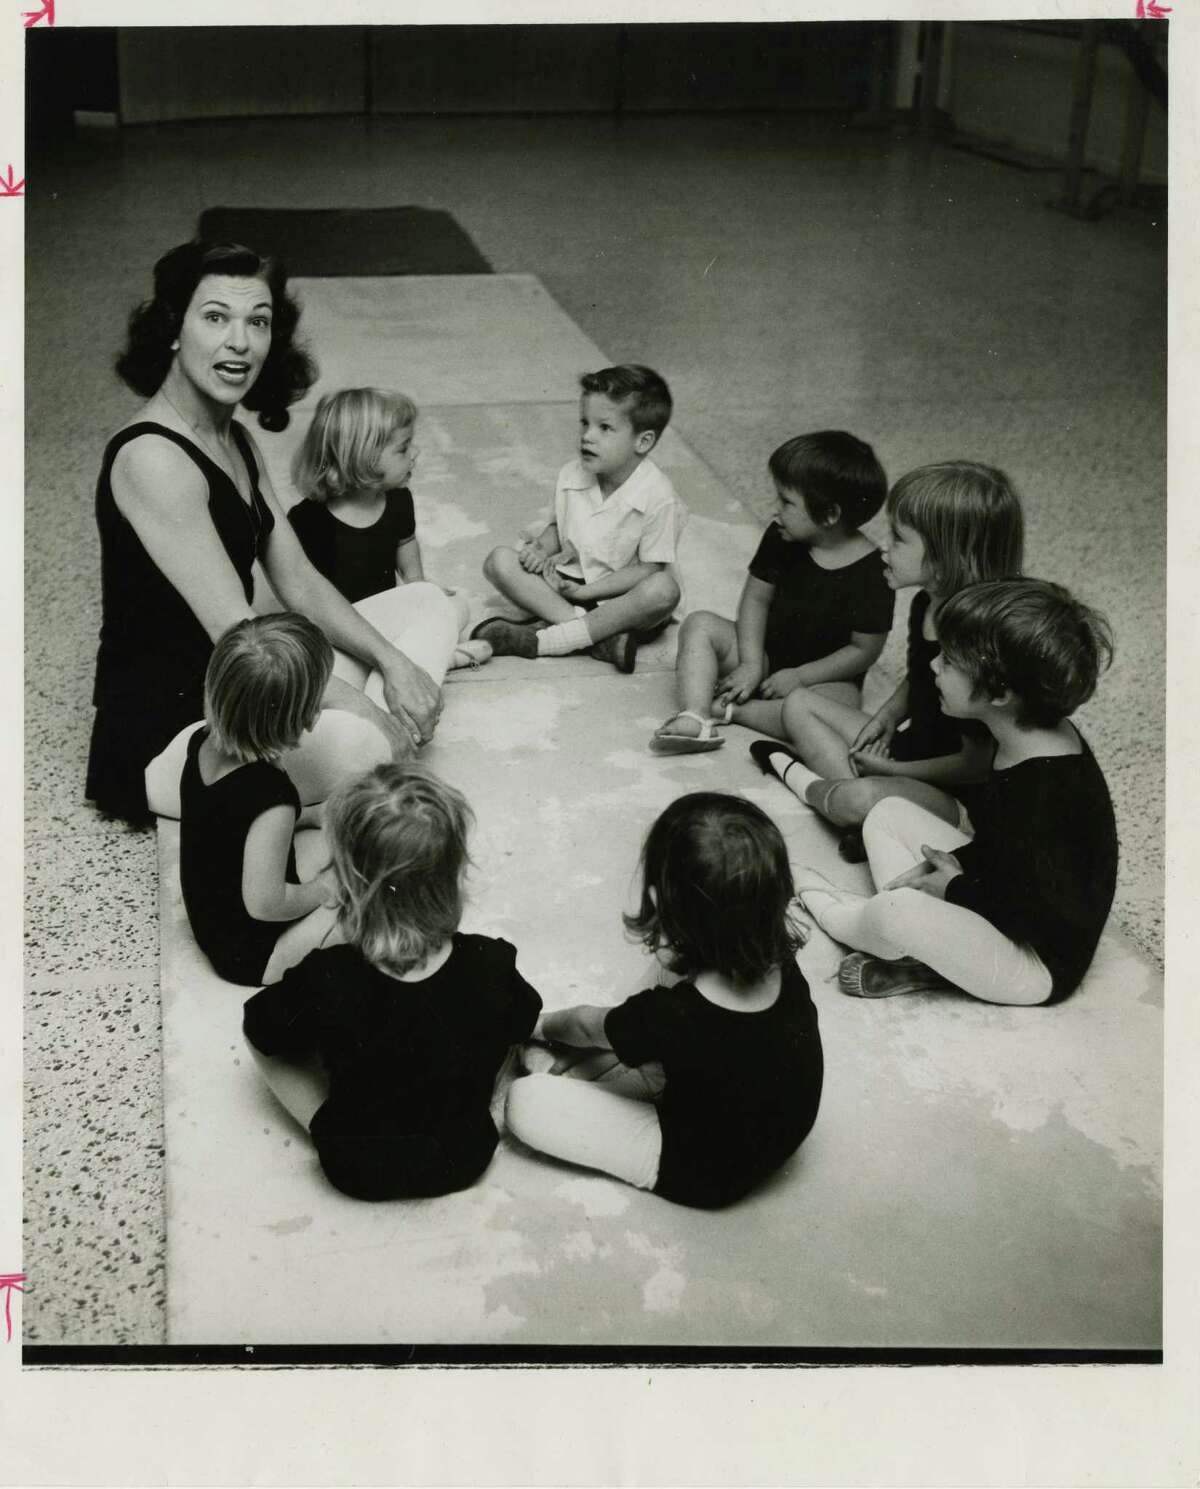 Patsy Swayze teaches a class of young students in 1966.